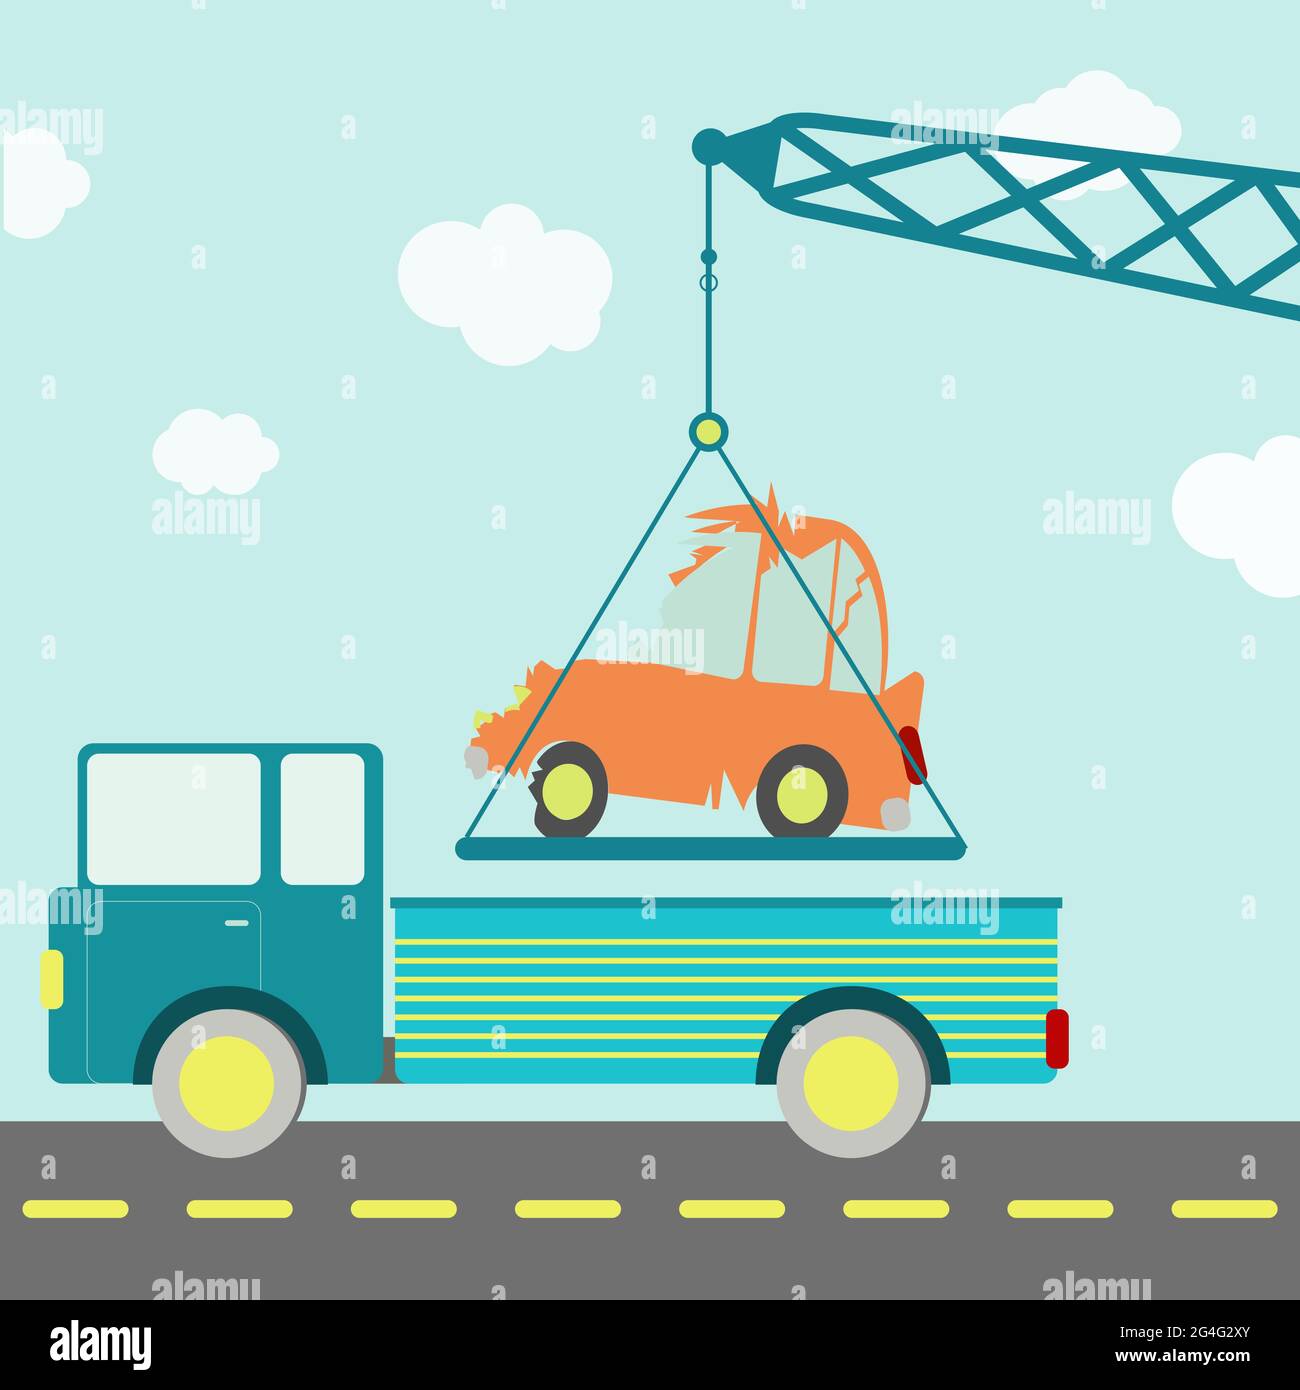 Crane carrying a crashed car being put on a truck on the road. Blue sky in the background. Stock Vector